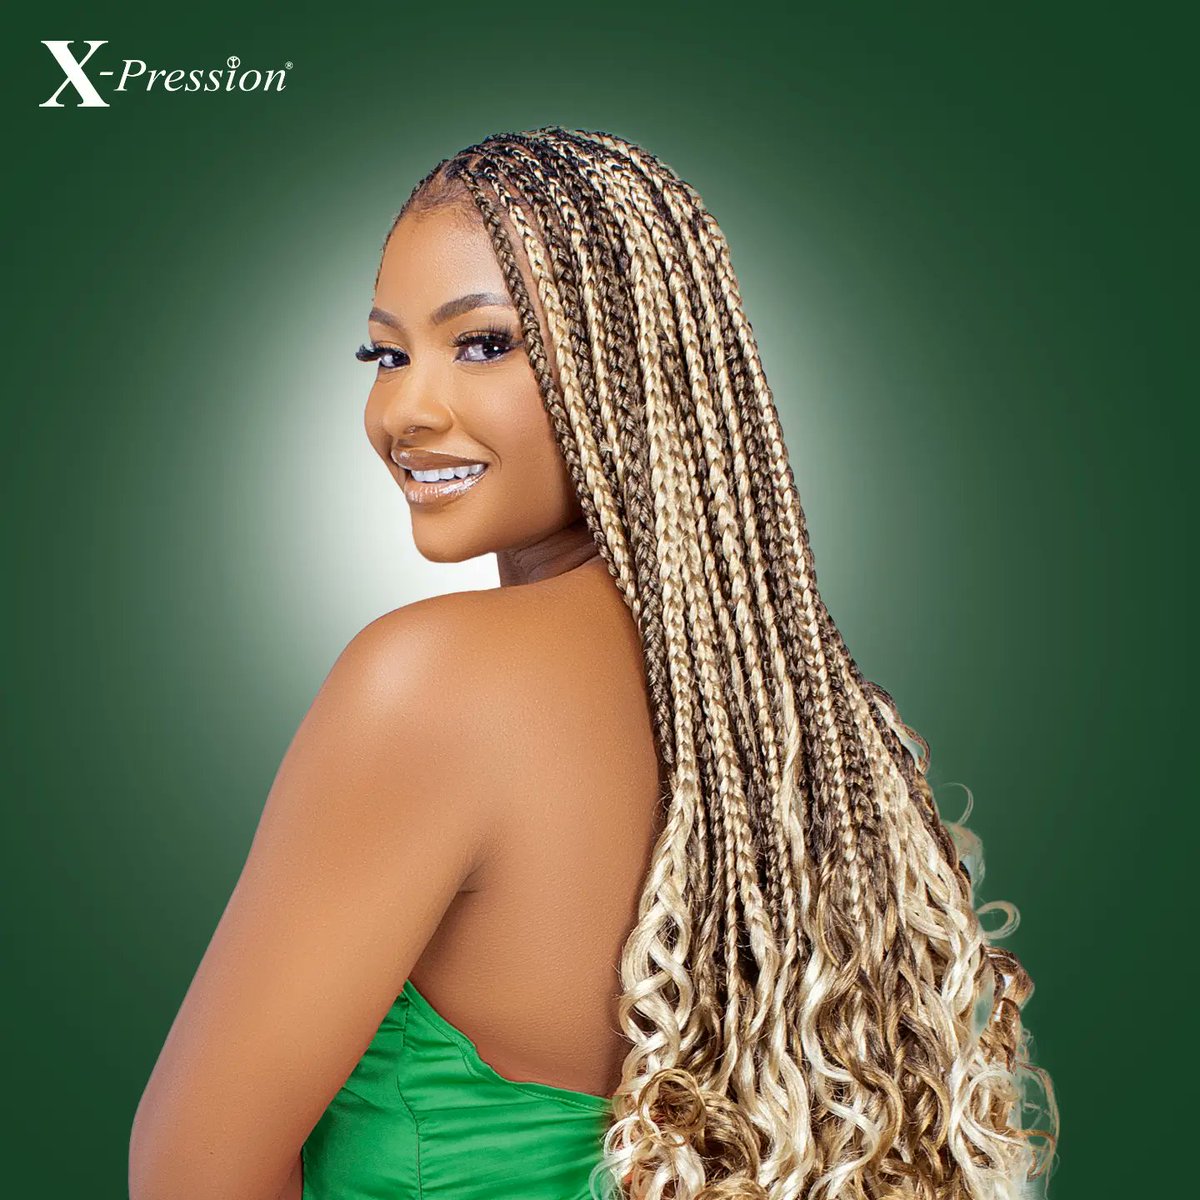 Your Weekend just got 12X Better💚. Add a touch of sophistication and elegance to your look. 

Let your Braid flow with unmatched charm and beauty.

#xp4you #xpression #xpressionhair 
#12XCurlyBody #12Xcurly 
#bekanekalon™ 
#braids #Saturday 
#knotlessbraids #Weekend